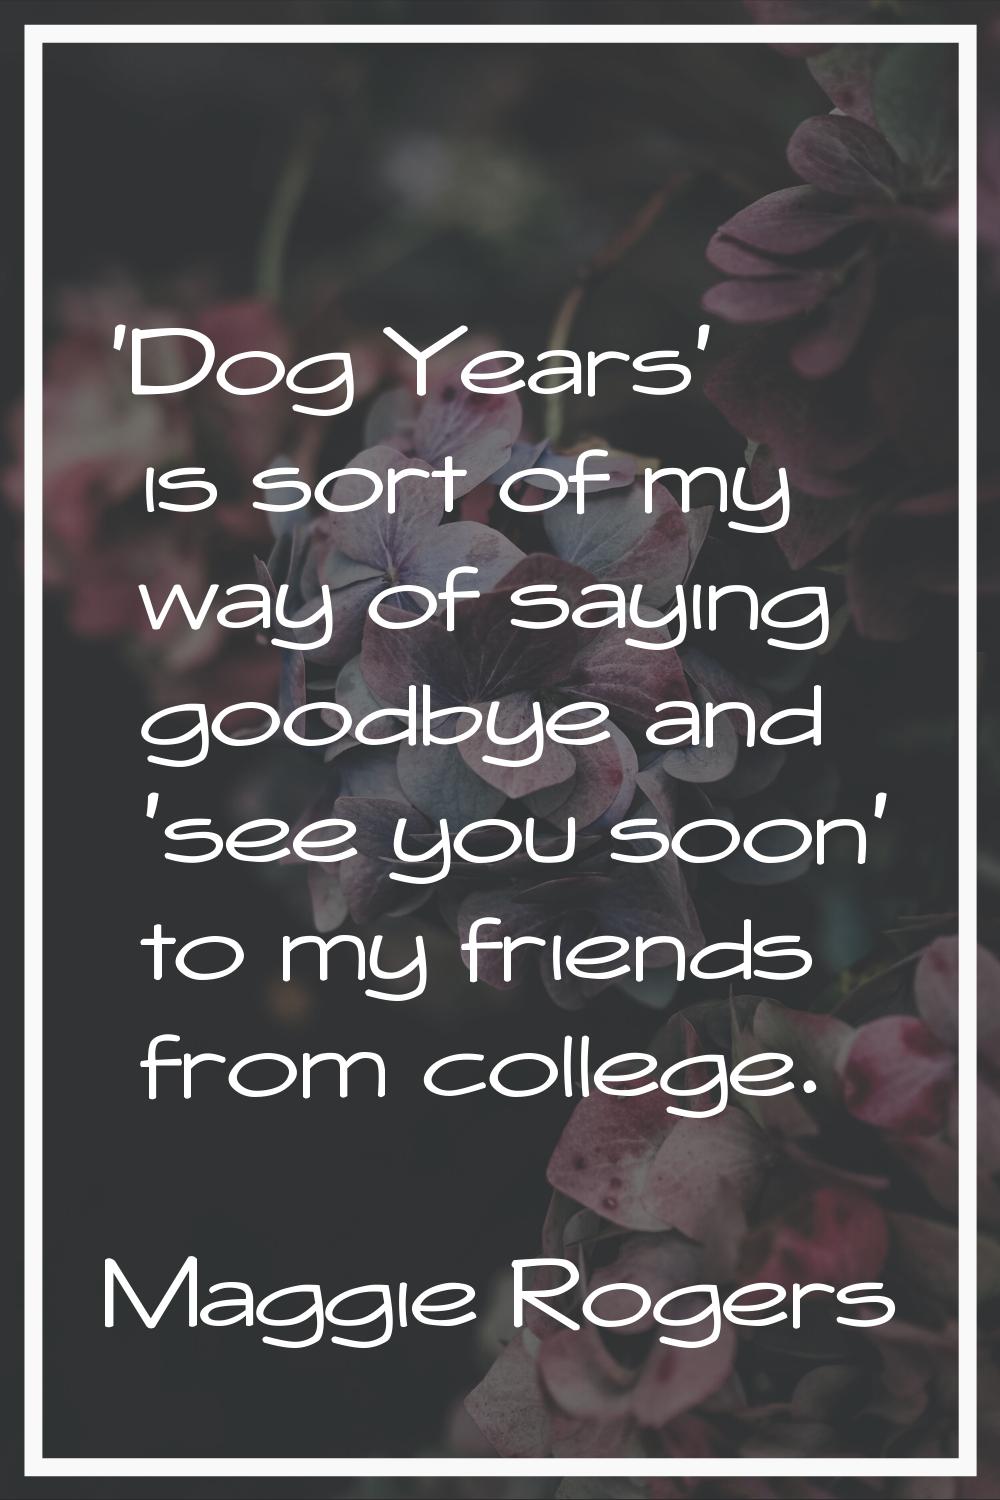 'Dog Years' is sort of my way of saying goodbye and 'see you soon' to my friends from college.